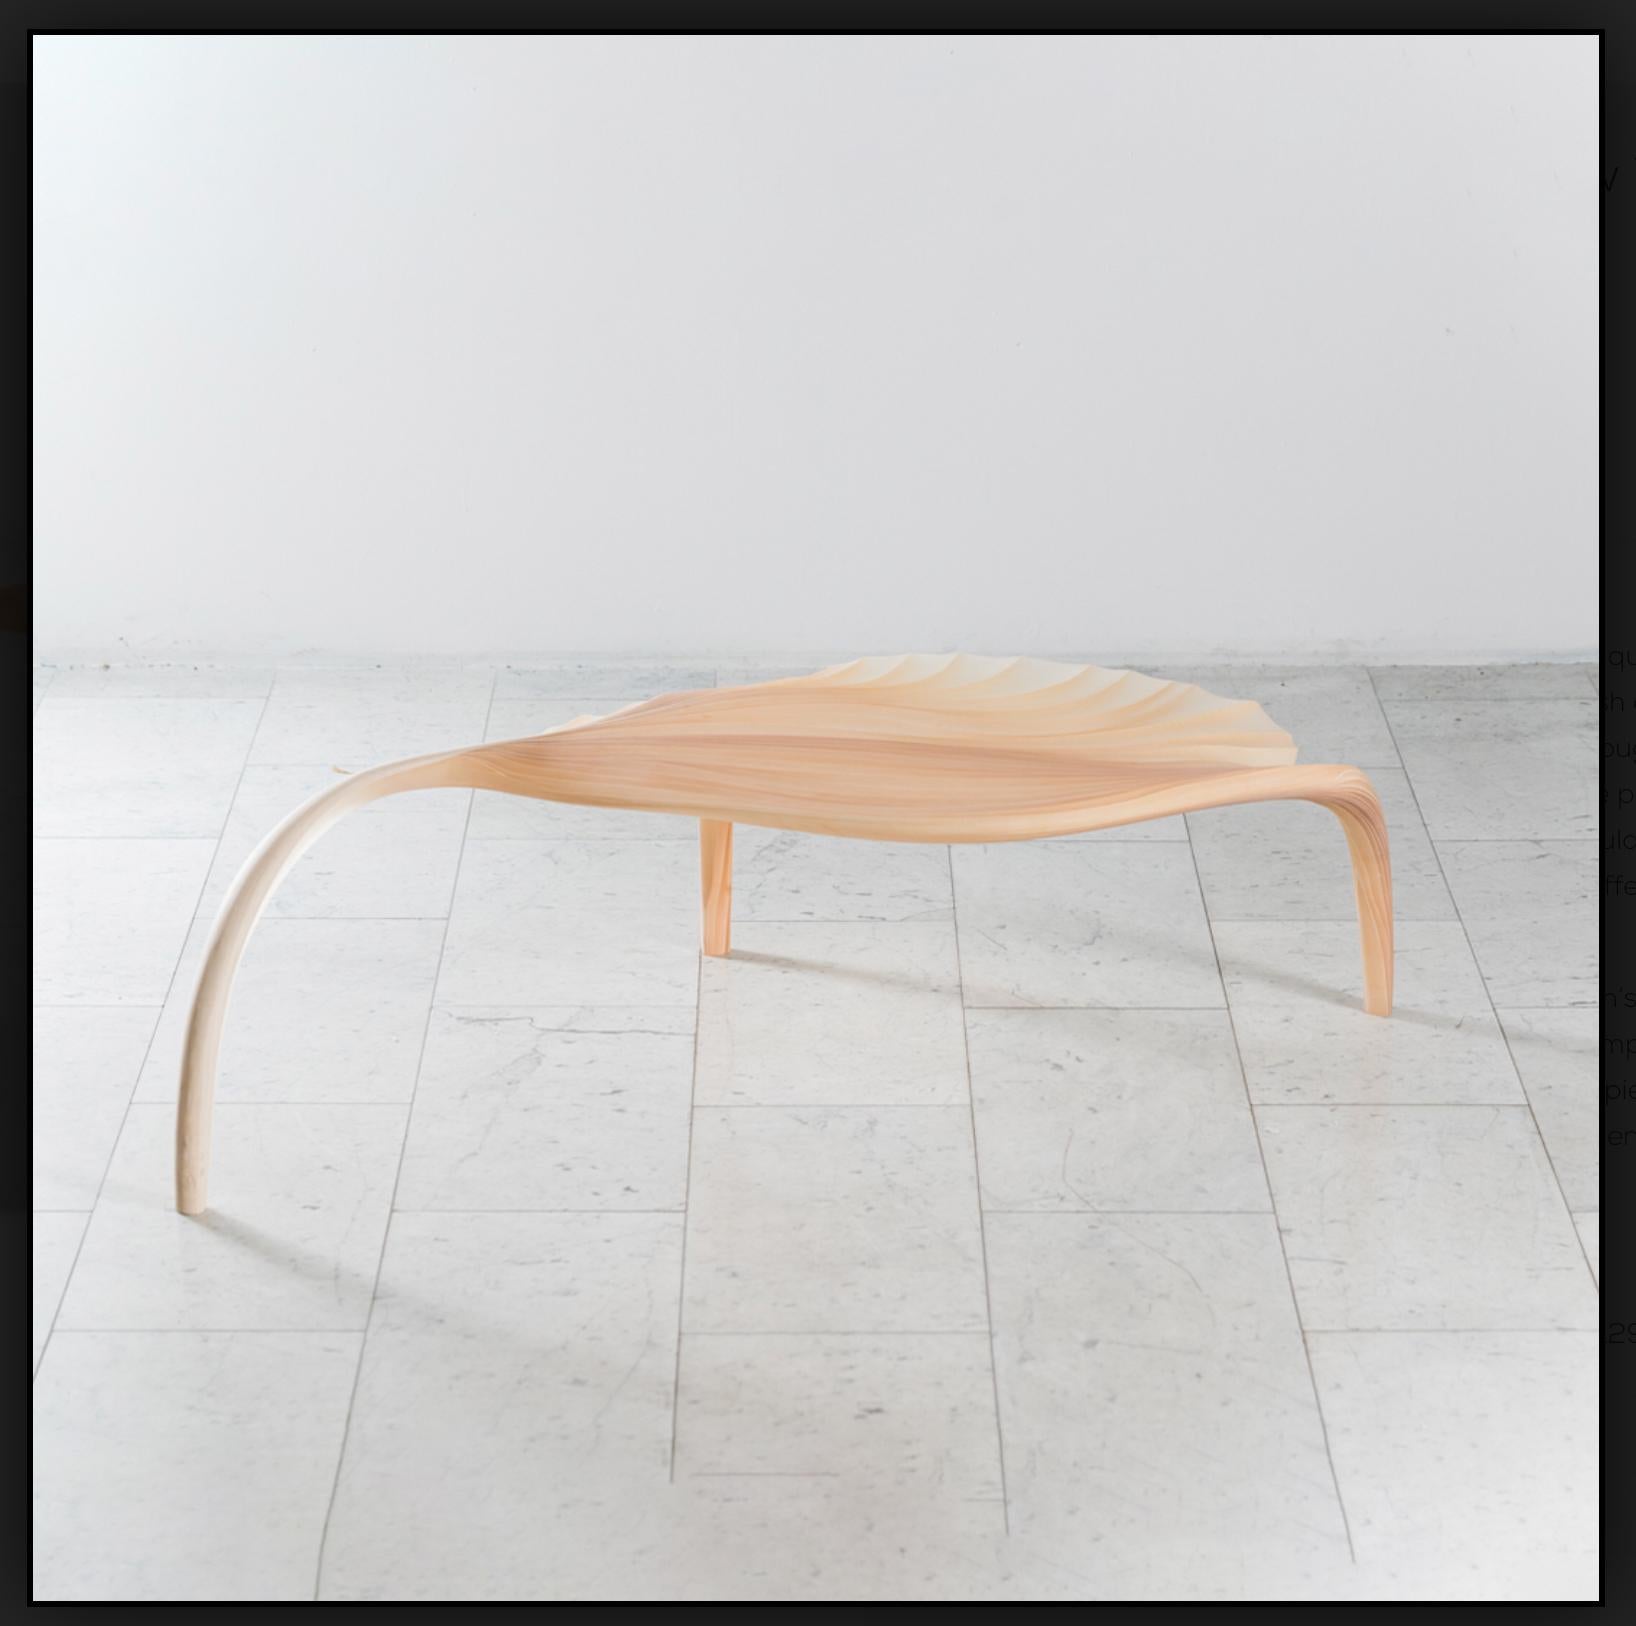 Marc Fish Ethereal Sculptural Organic Low Table Sycamore and Resin Uk 2022 In New Condition For Sale In Newhaven, GB